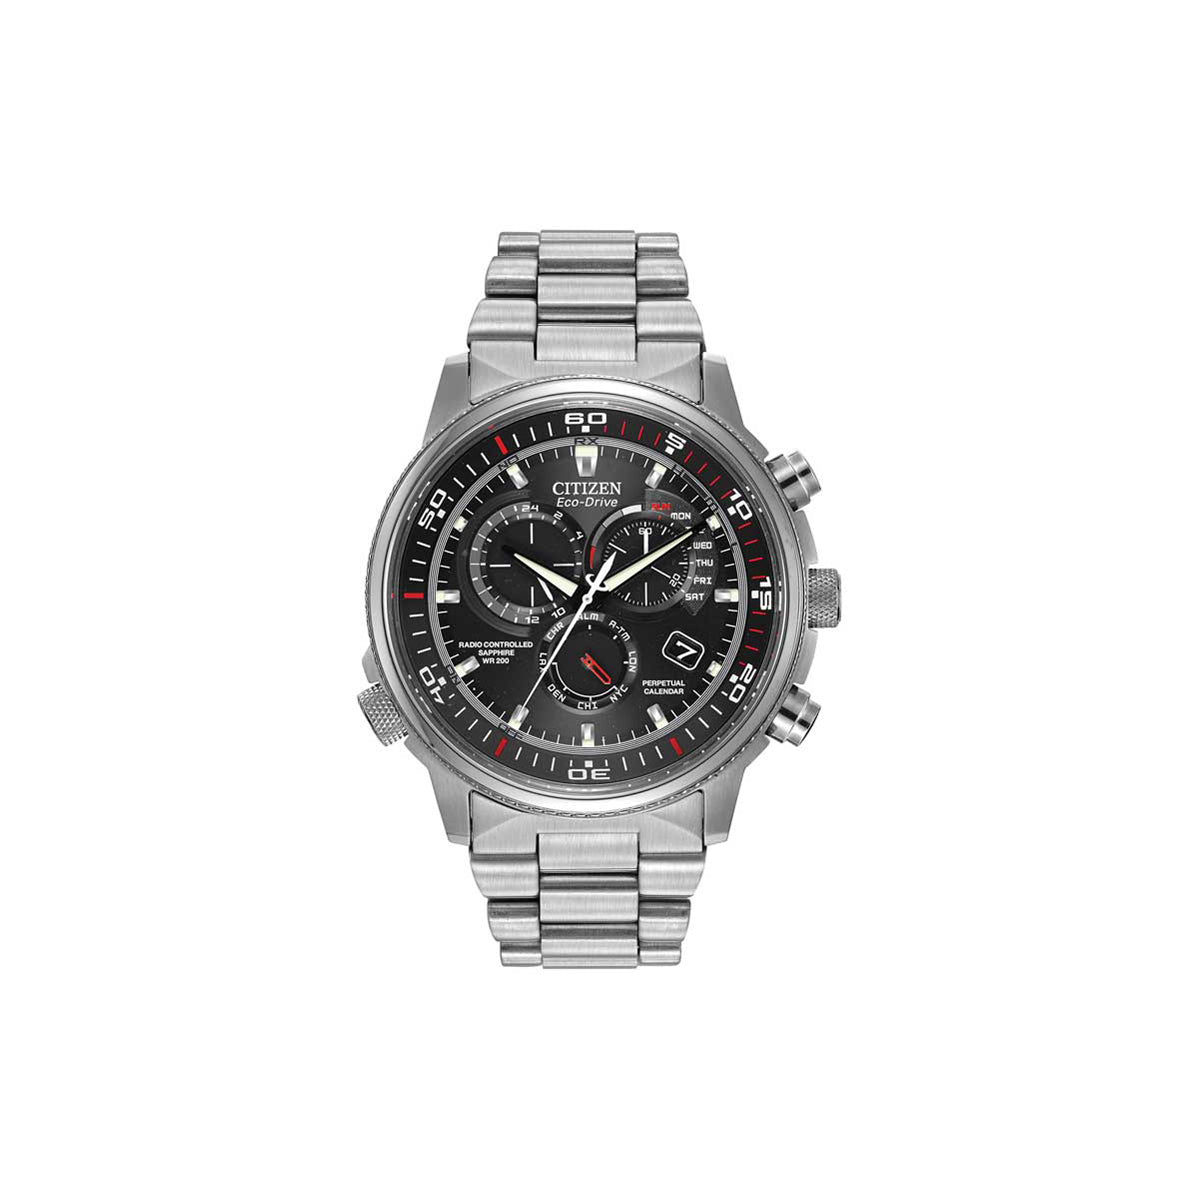 Citizen Men's Eco-Drive Perpetual Chrono A-T Stainless Steel Bracelet Watch 44mm AT4110-55E